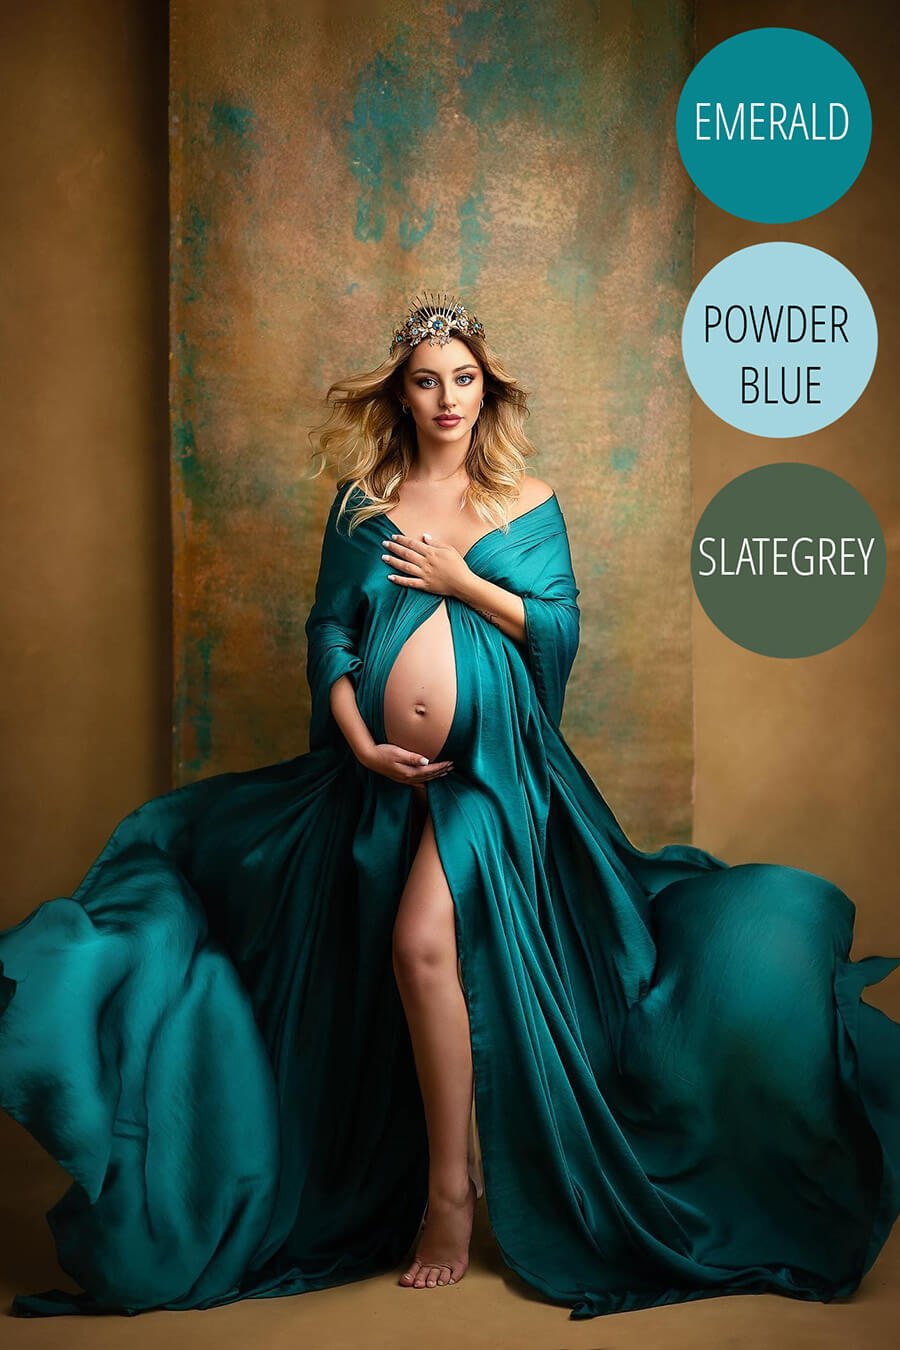 blond pregnant model poses in a studio wearing an emerald cape. she has a crown to match the style.